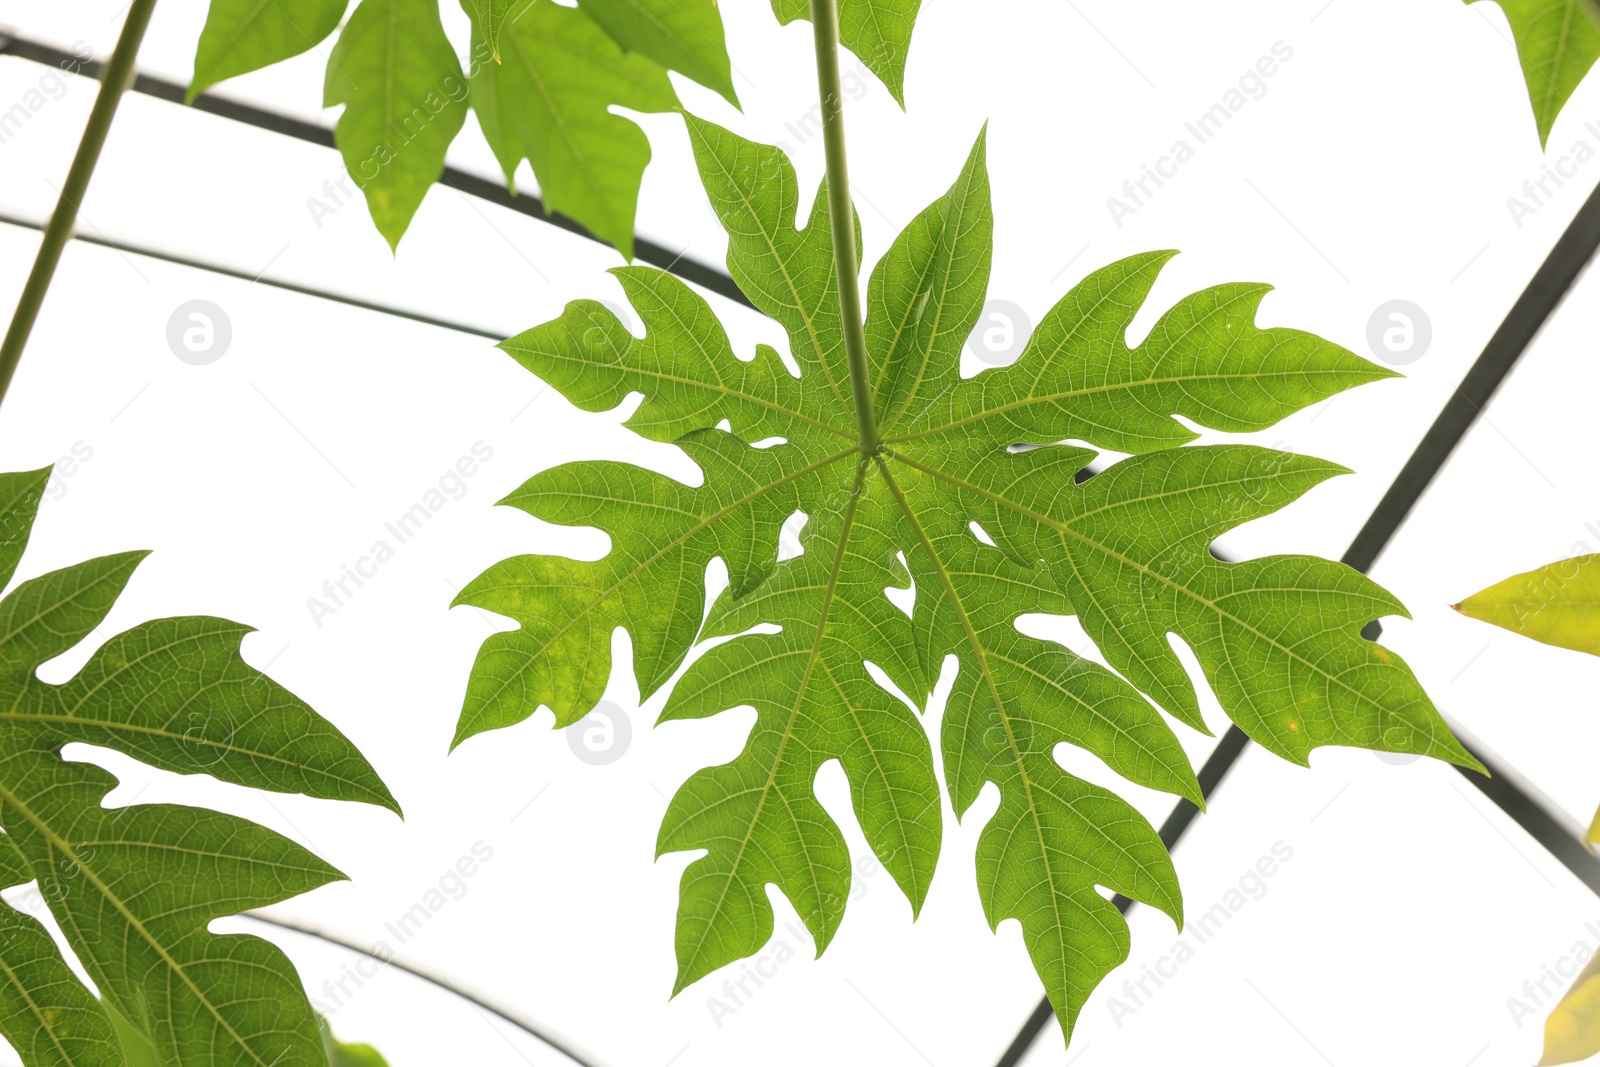 Photo of Papaya tree with beautiful leaves growing in greenhouse, bottom view